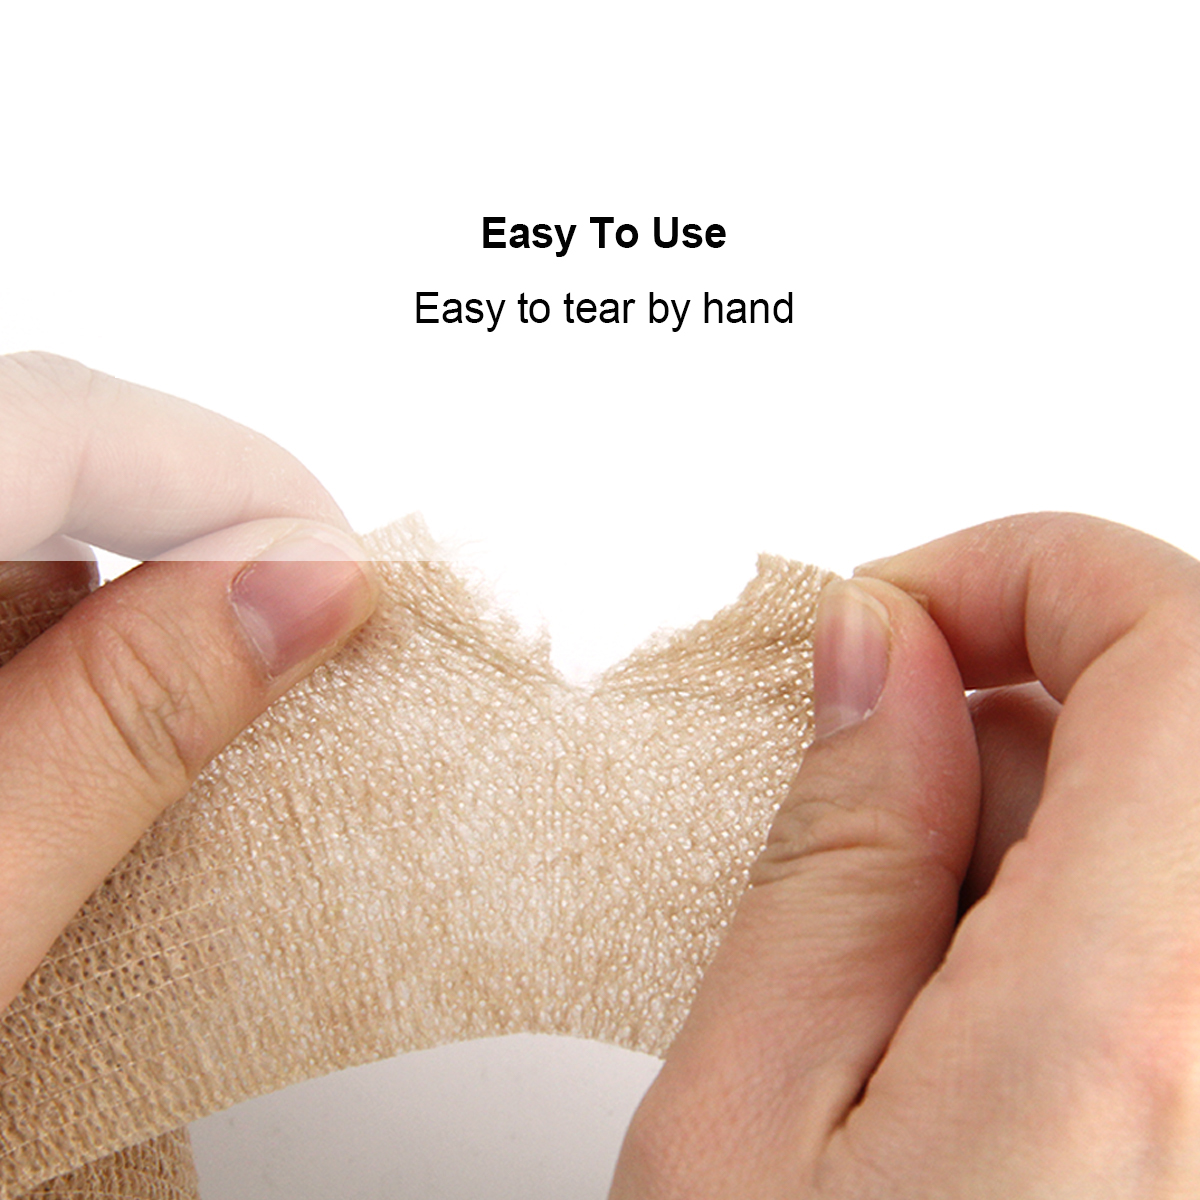 Animal bandage is easy to tear